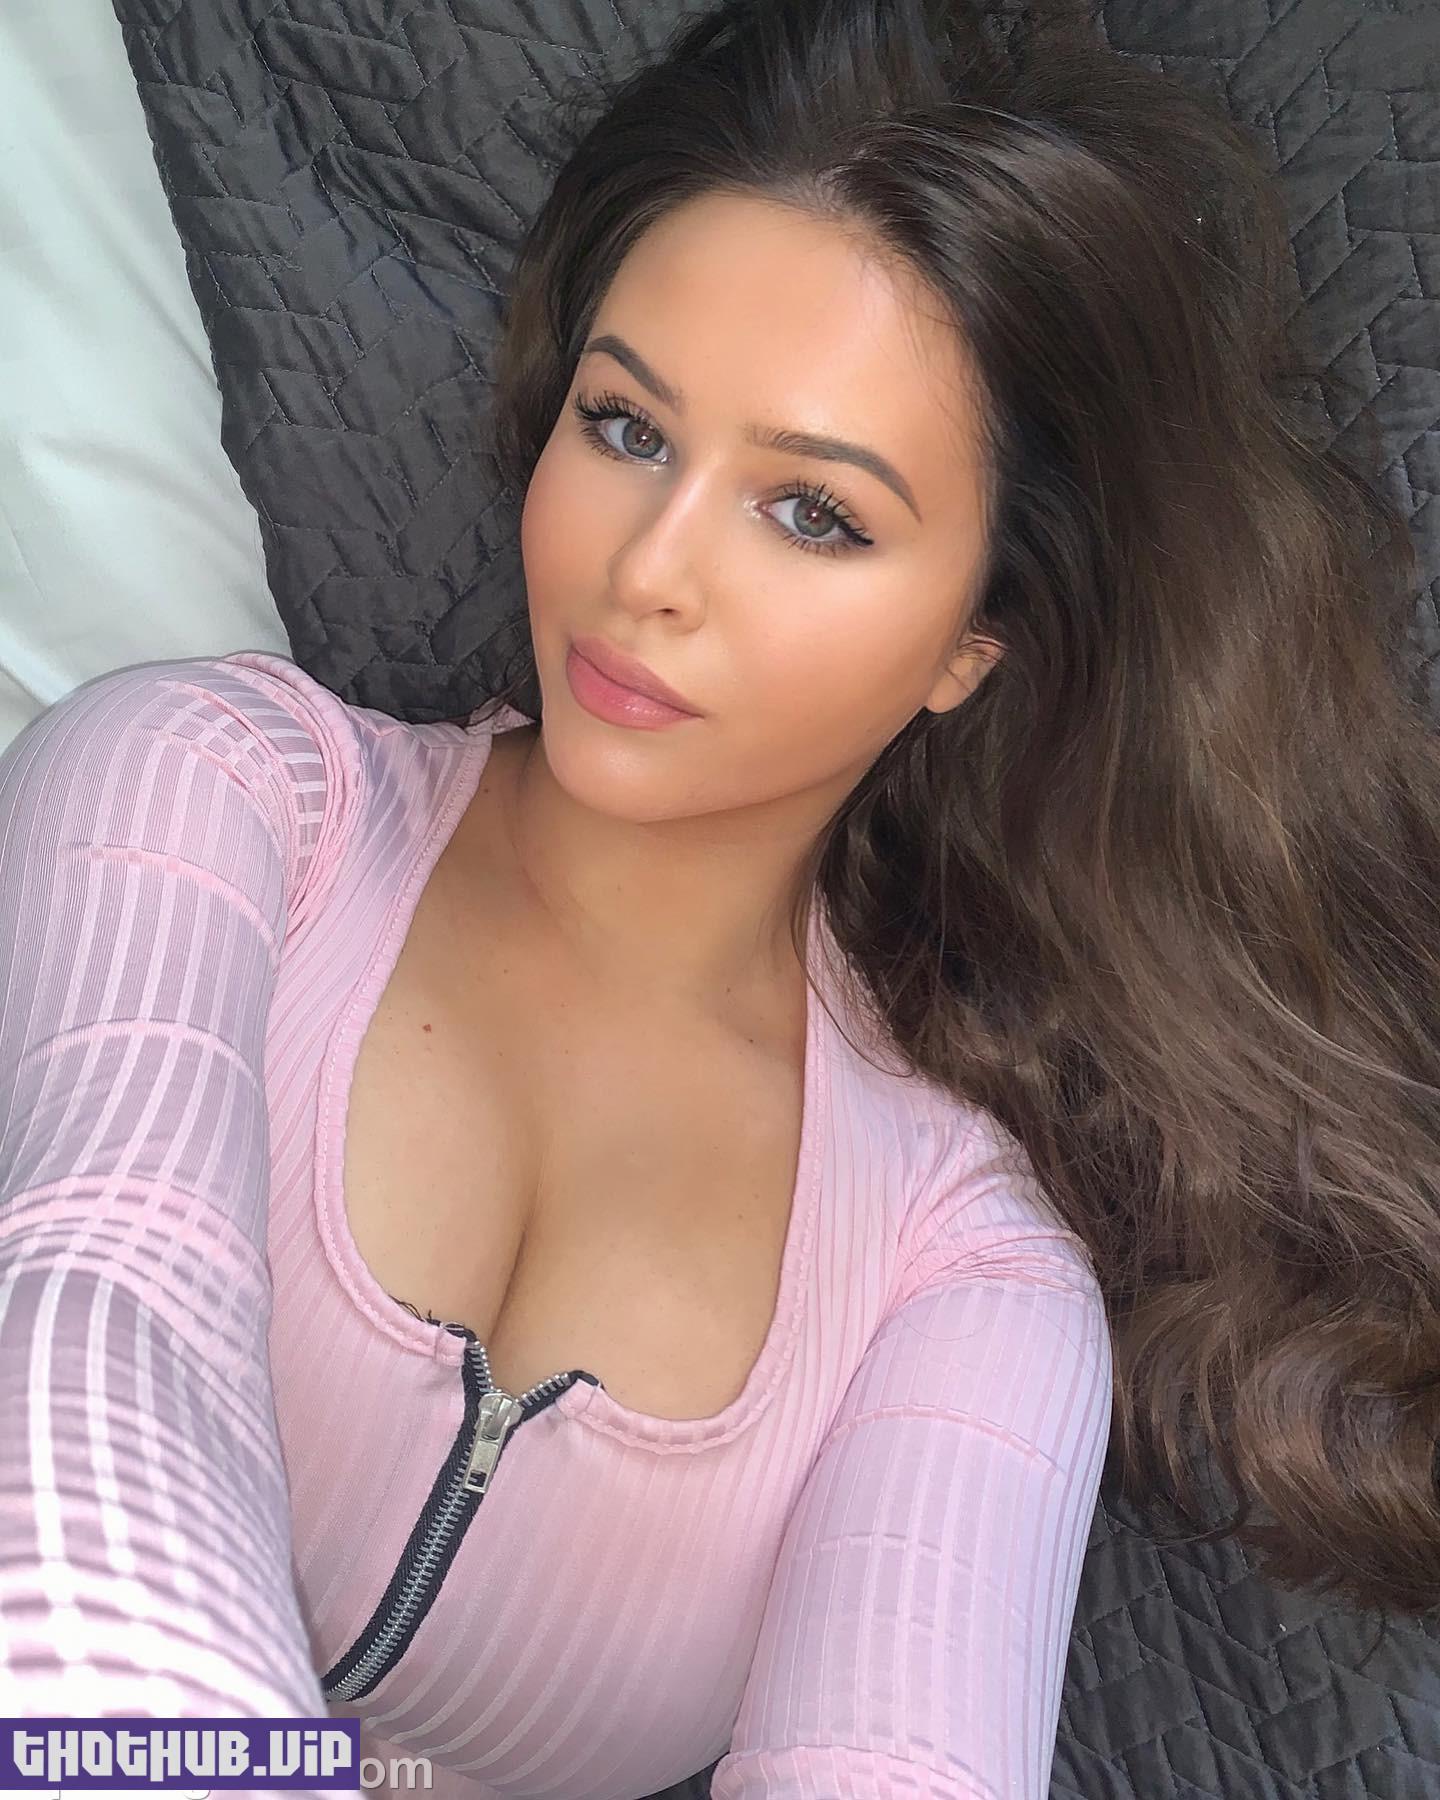 1661372124 270 Simonegoodall1 %E2%80%93 Busty Brunette with Perfect Body